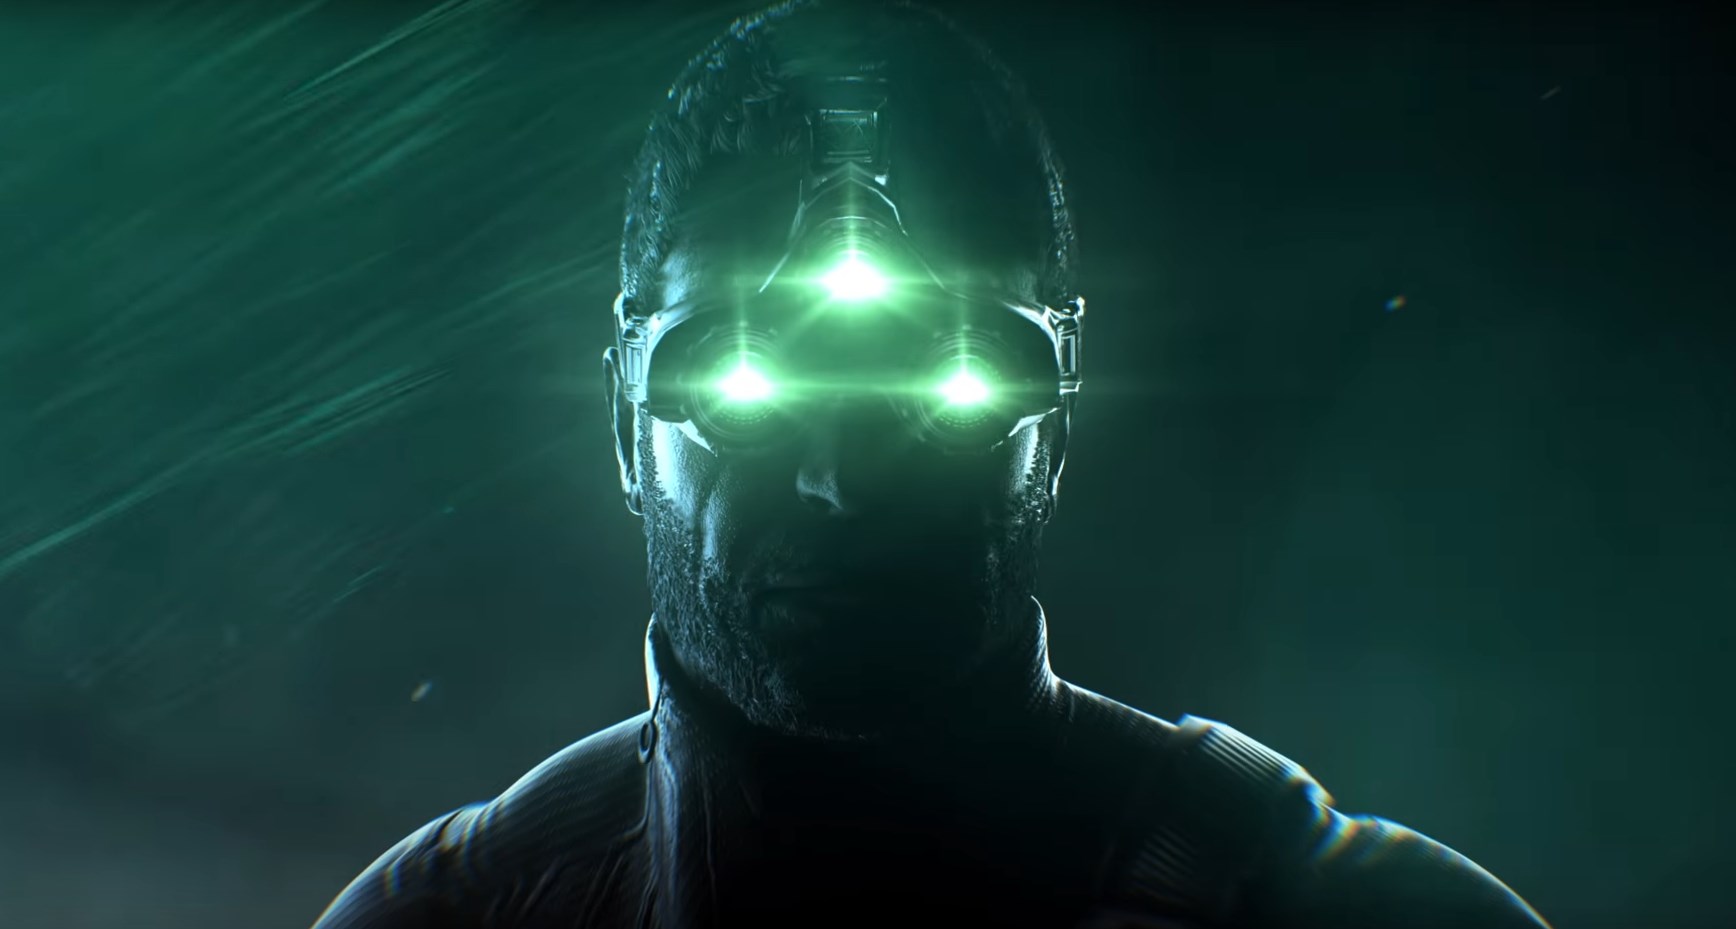 Ubisoft's original 'Splinter Cell' team did not like the awful books